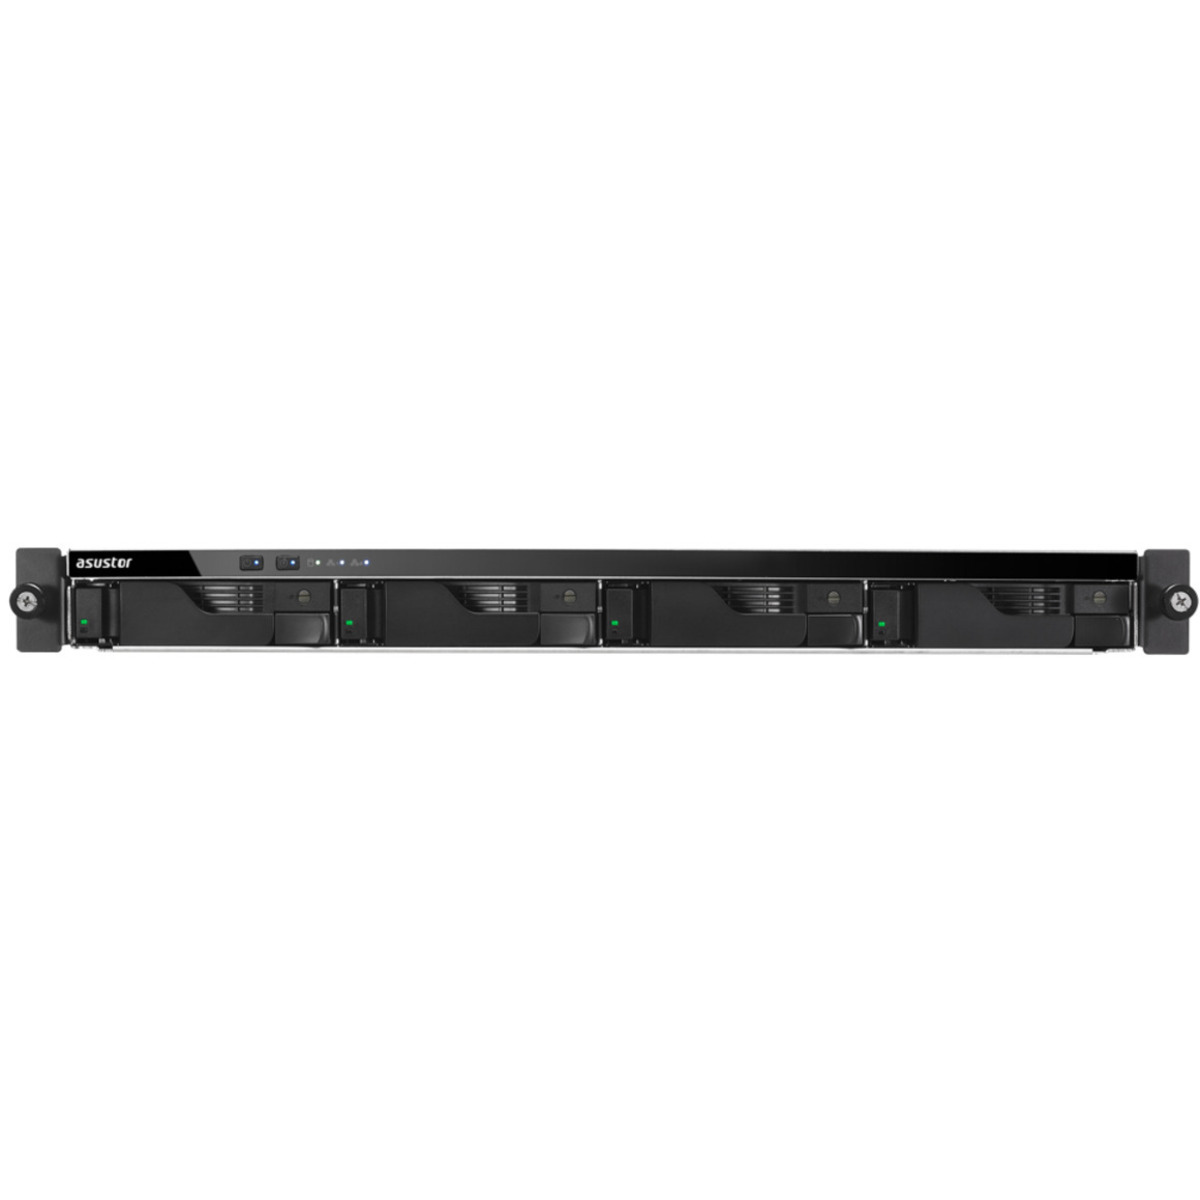 ASUSTOR LOCKERSTOR 4RS AS6504RS 54tb 4-Bay RackMount Multimedia / Power User / Business NAS - Network Attached Storage Device 3x18tb Seagate IronWolf Pro ST18000NT001 3.5 7200rpm SATA 6Gb/s HDD NAS Class Drives Installed - Burn-In Tested - FREE RAM UPGRADE LOCKERSTOR 4RS AS6504RS